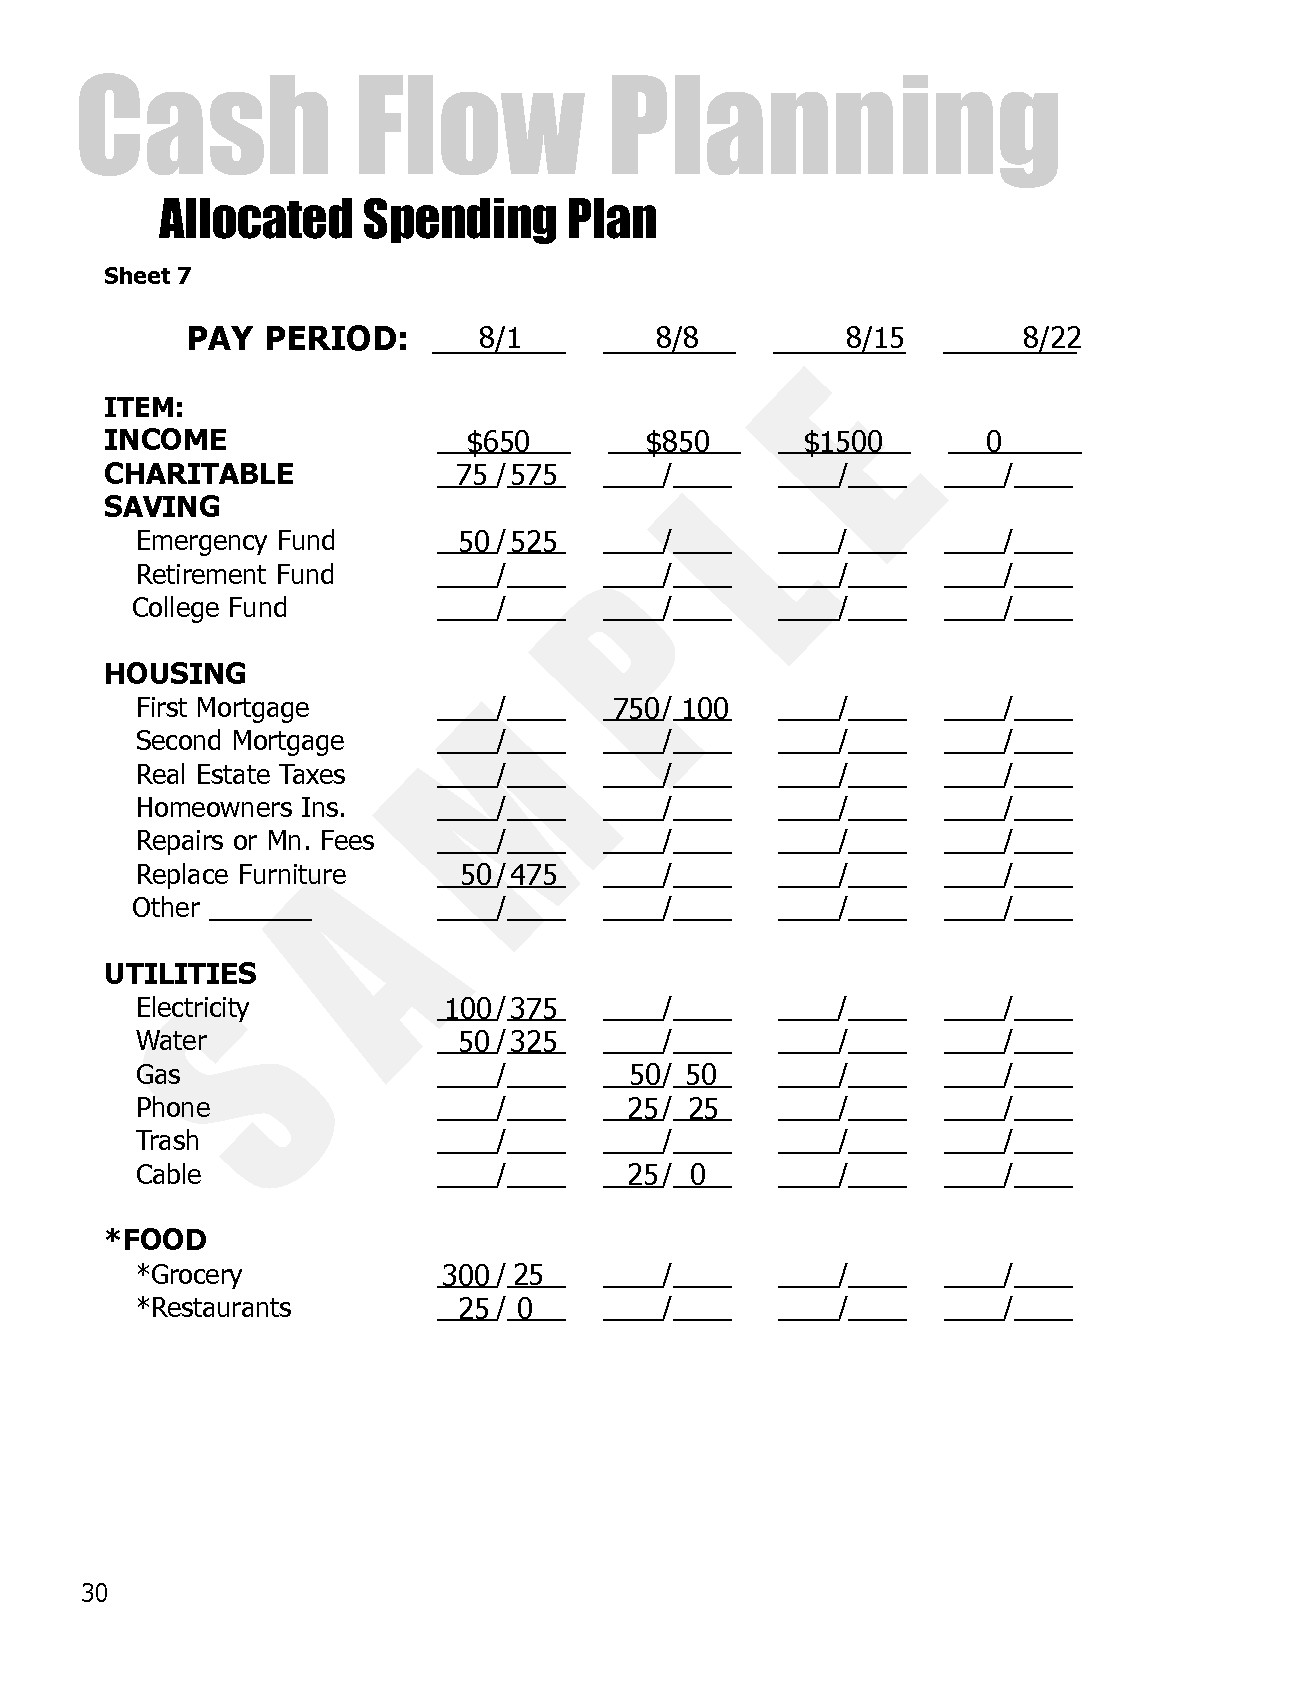 How To Use Dave Ramsey S Allocated Spending Plan Finance Document Worksheet